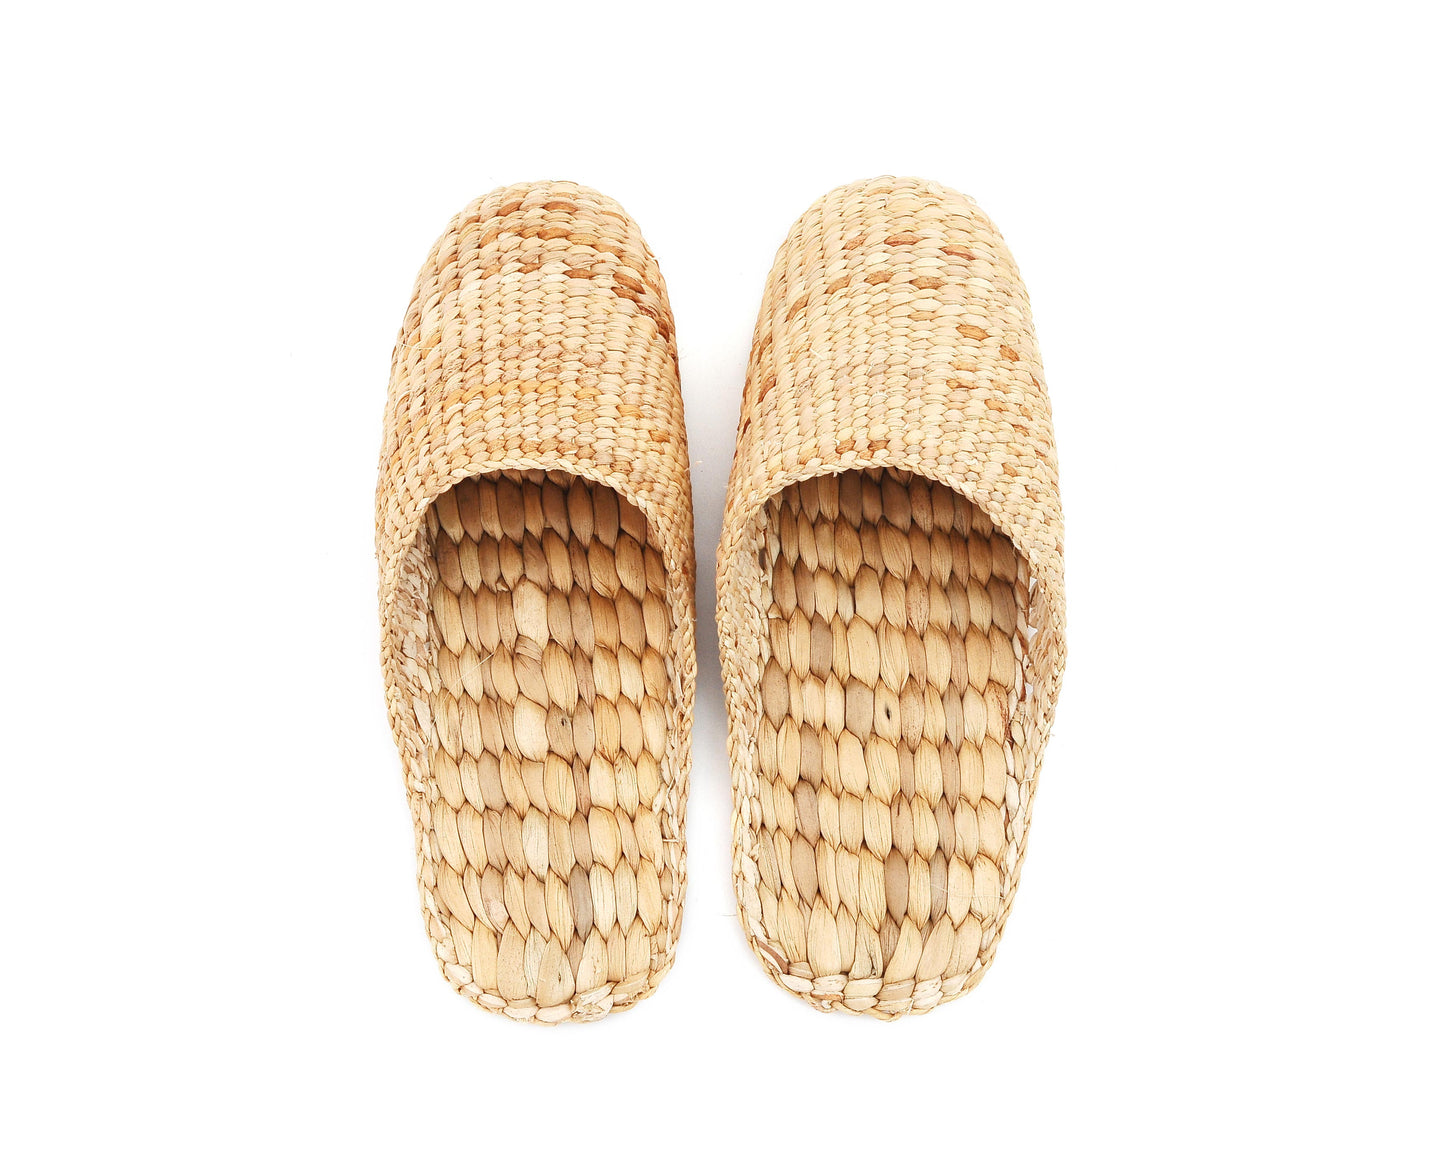 Natural Handmade - Closed Toe Slippers for Men and Ladies - Hand Woven Water Hyacinth